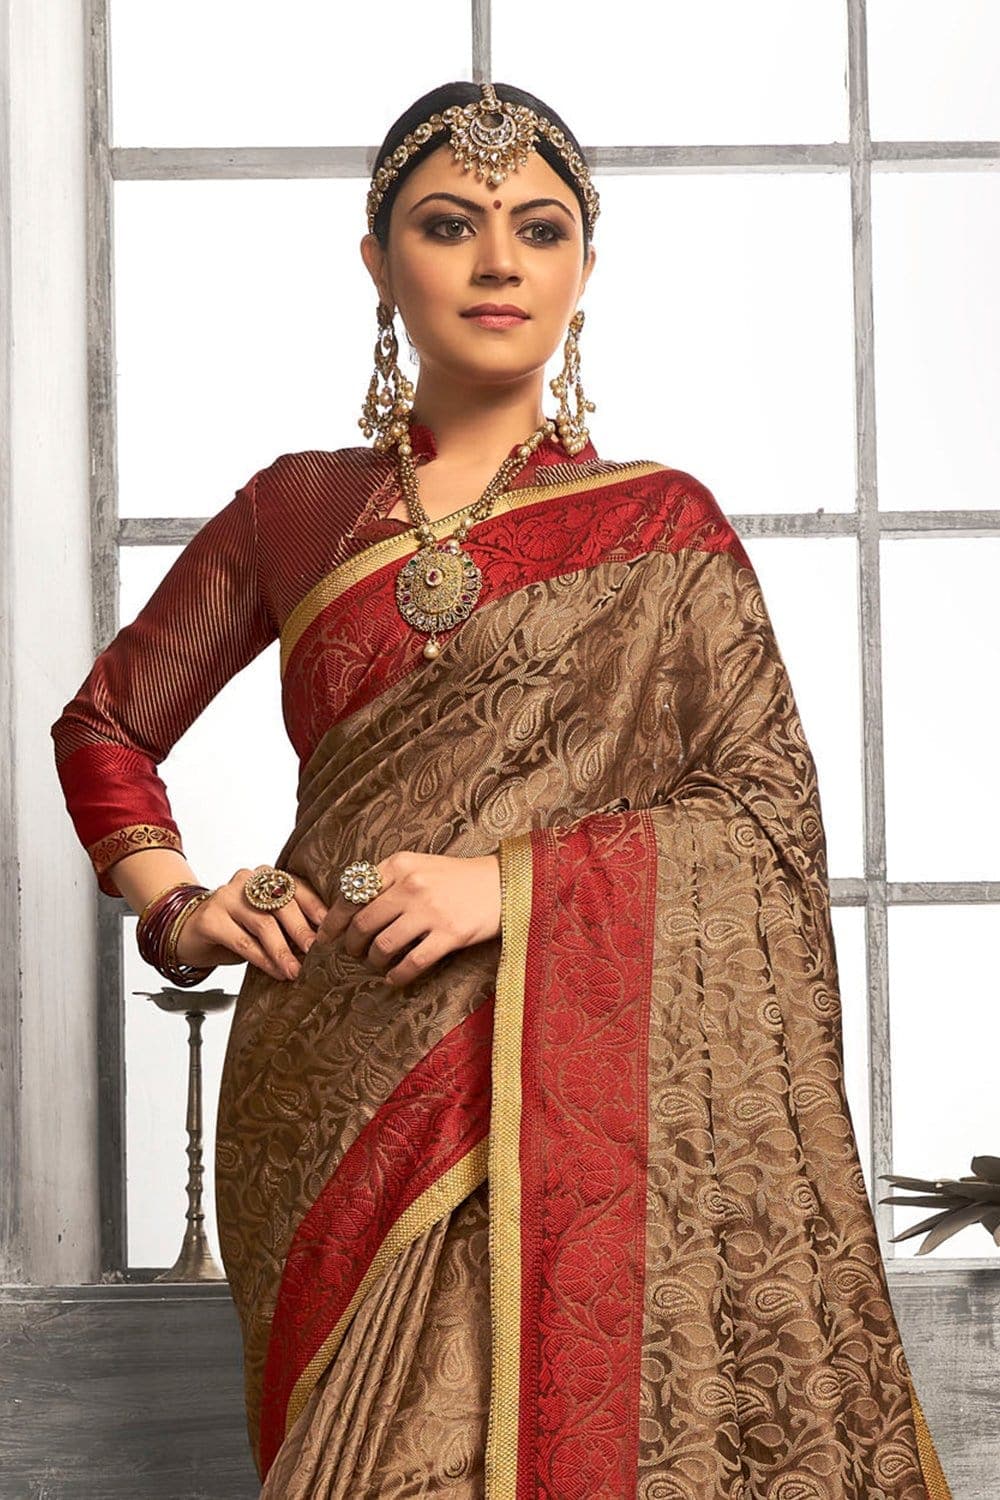 Coffee Brown Colour Banarasi Silk Saree - Online shopping in Nepal, Nepal  online shopping, Send gifts, Farlin product, Wall decor canvas, dolls, buy  gadgets, bed furniture, dinning chairs, sofa, baby products in